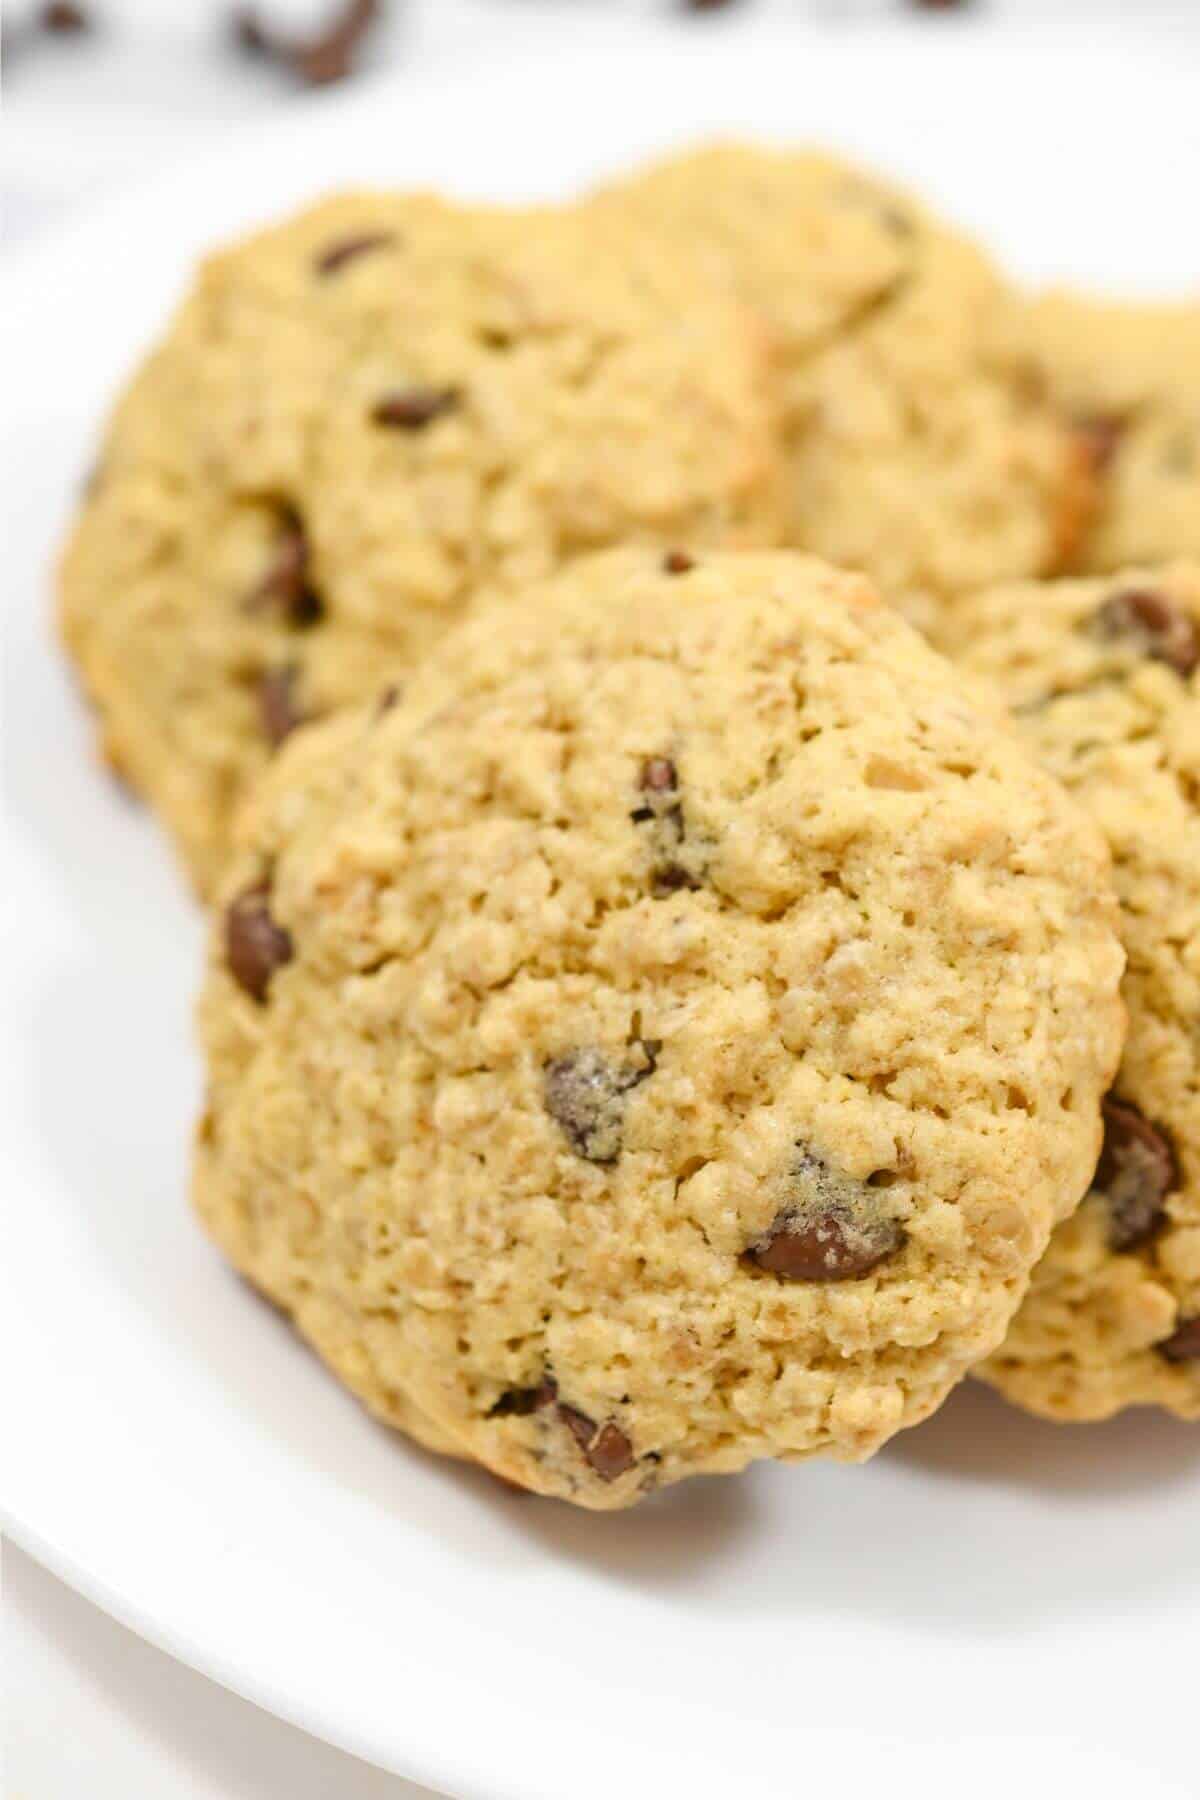 A group of oatmeal chocolate chip cookies on a white surface.